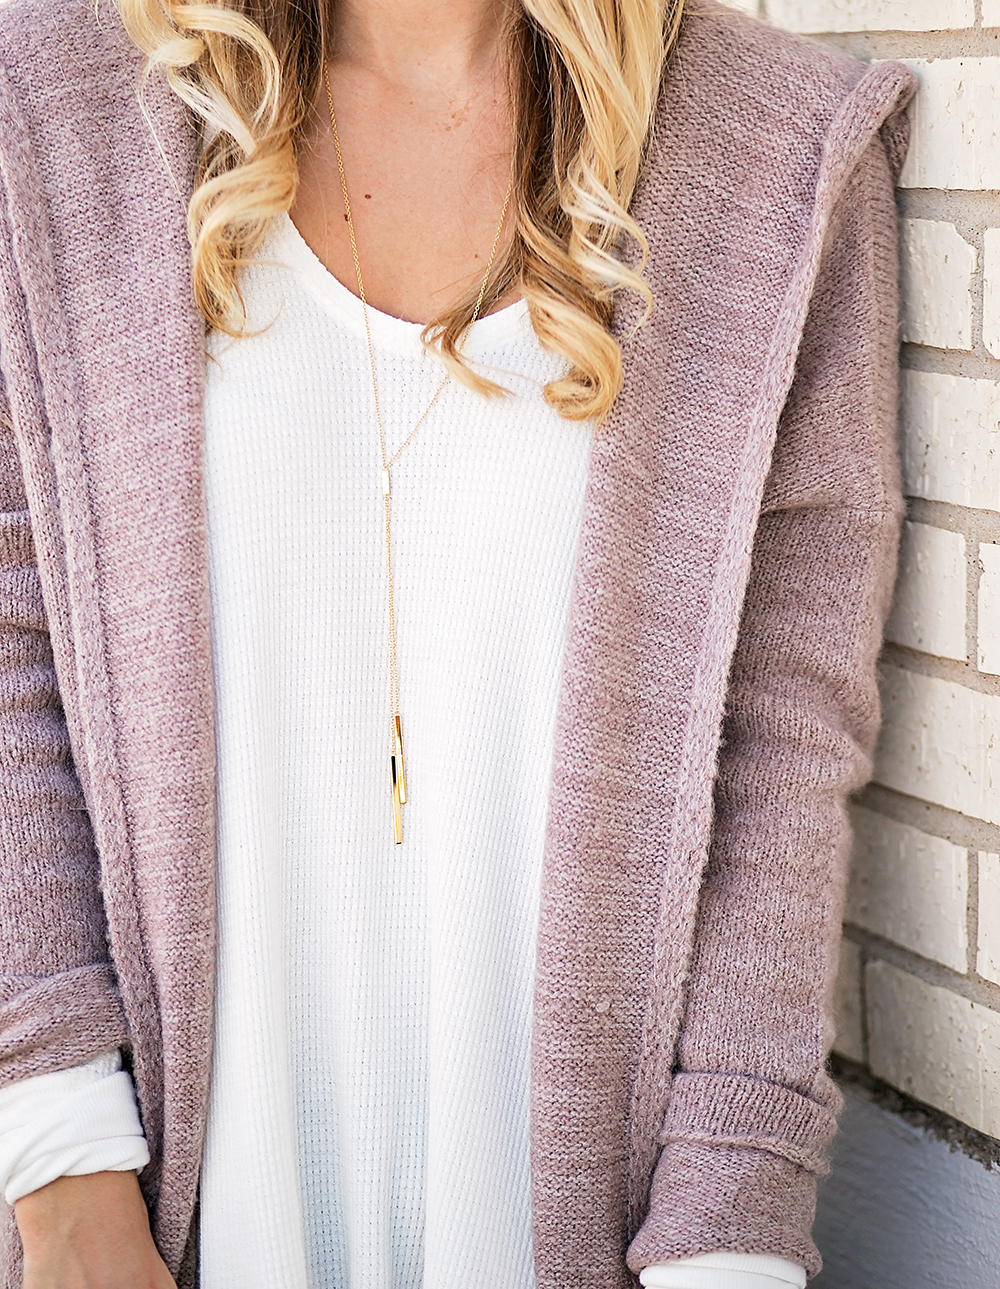 livvyland-blog-olivia-watson-blush-pink-dusty-rose-cardigan-sweater-free-people-thermal-top-cozy-light-layers-nordstrom-fall-outfit-9